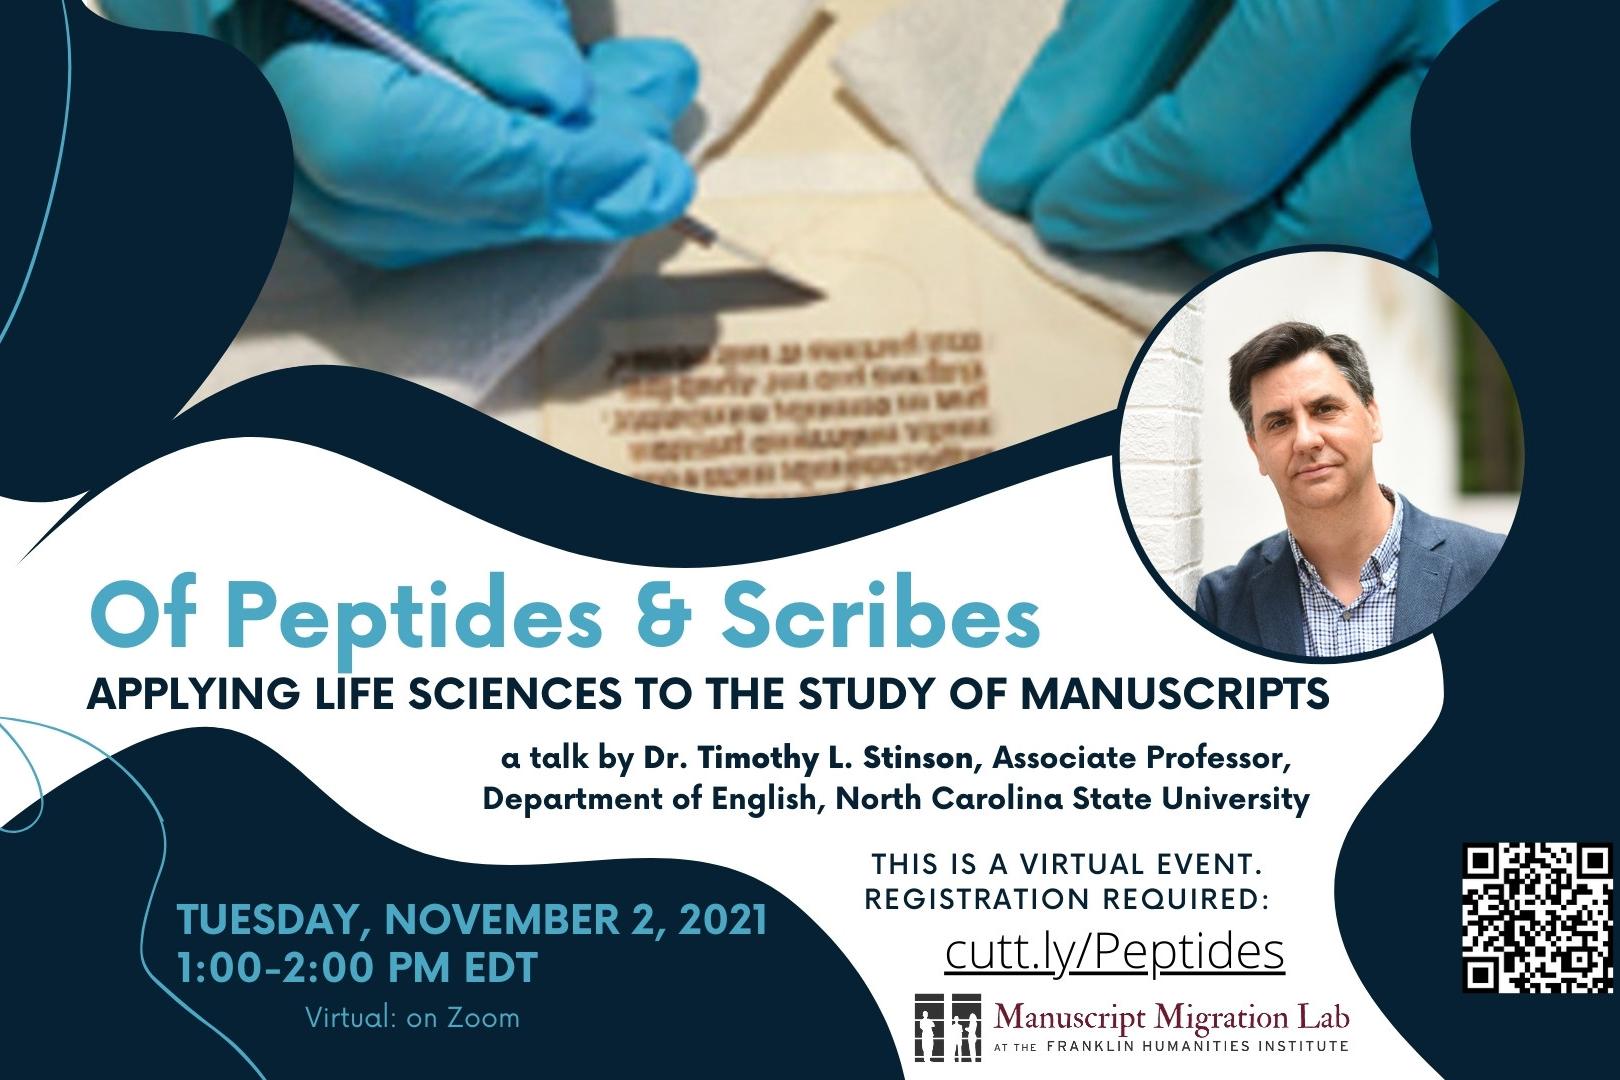 Flier with text: "Of Peptides and Scribes: Applying Life Sciences to the Study of Manuscripts  Tuesday, November 2, 2021  1:00 p.m. – 2:00 p.m. (EDT) - Featuring Dr. Timothy L. Stinson, Associate Professor, Department of English, North Carolina State University." Image: a white man with brown hair, next to image of a manuscript being examined by a person wearing blue gloves and holding a medical instrument.